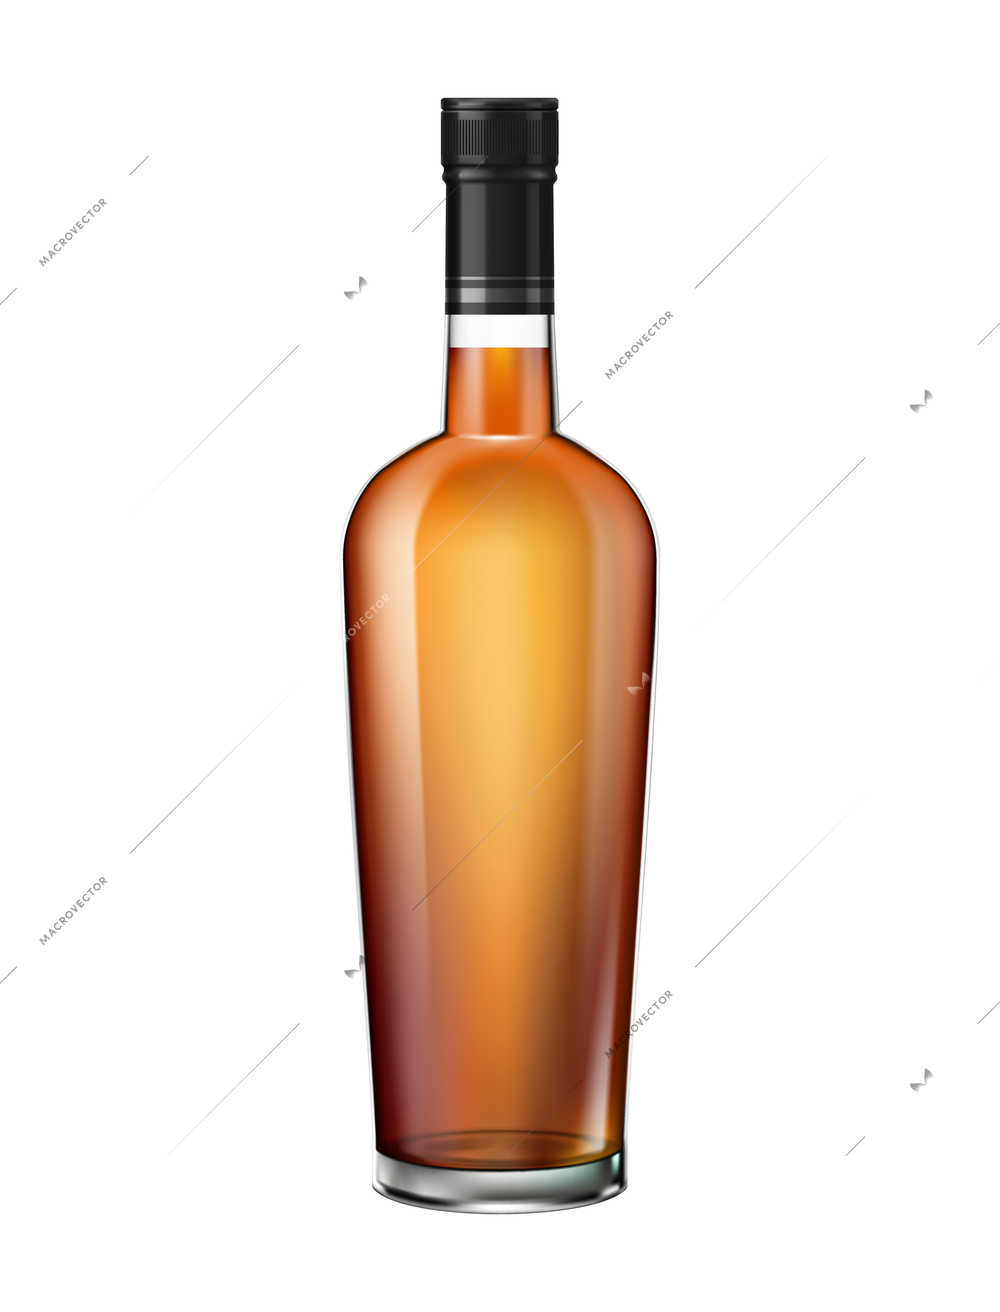 Brandy cognac whiskey glass bottles composition of realistic cylinder shaped bottle with brown liquid vector illustration